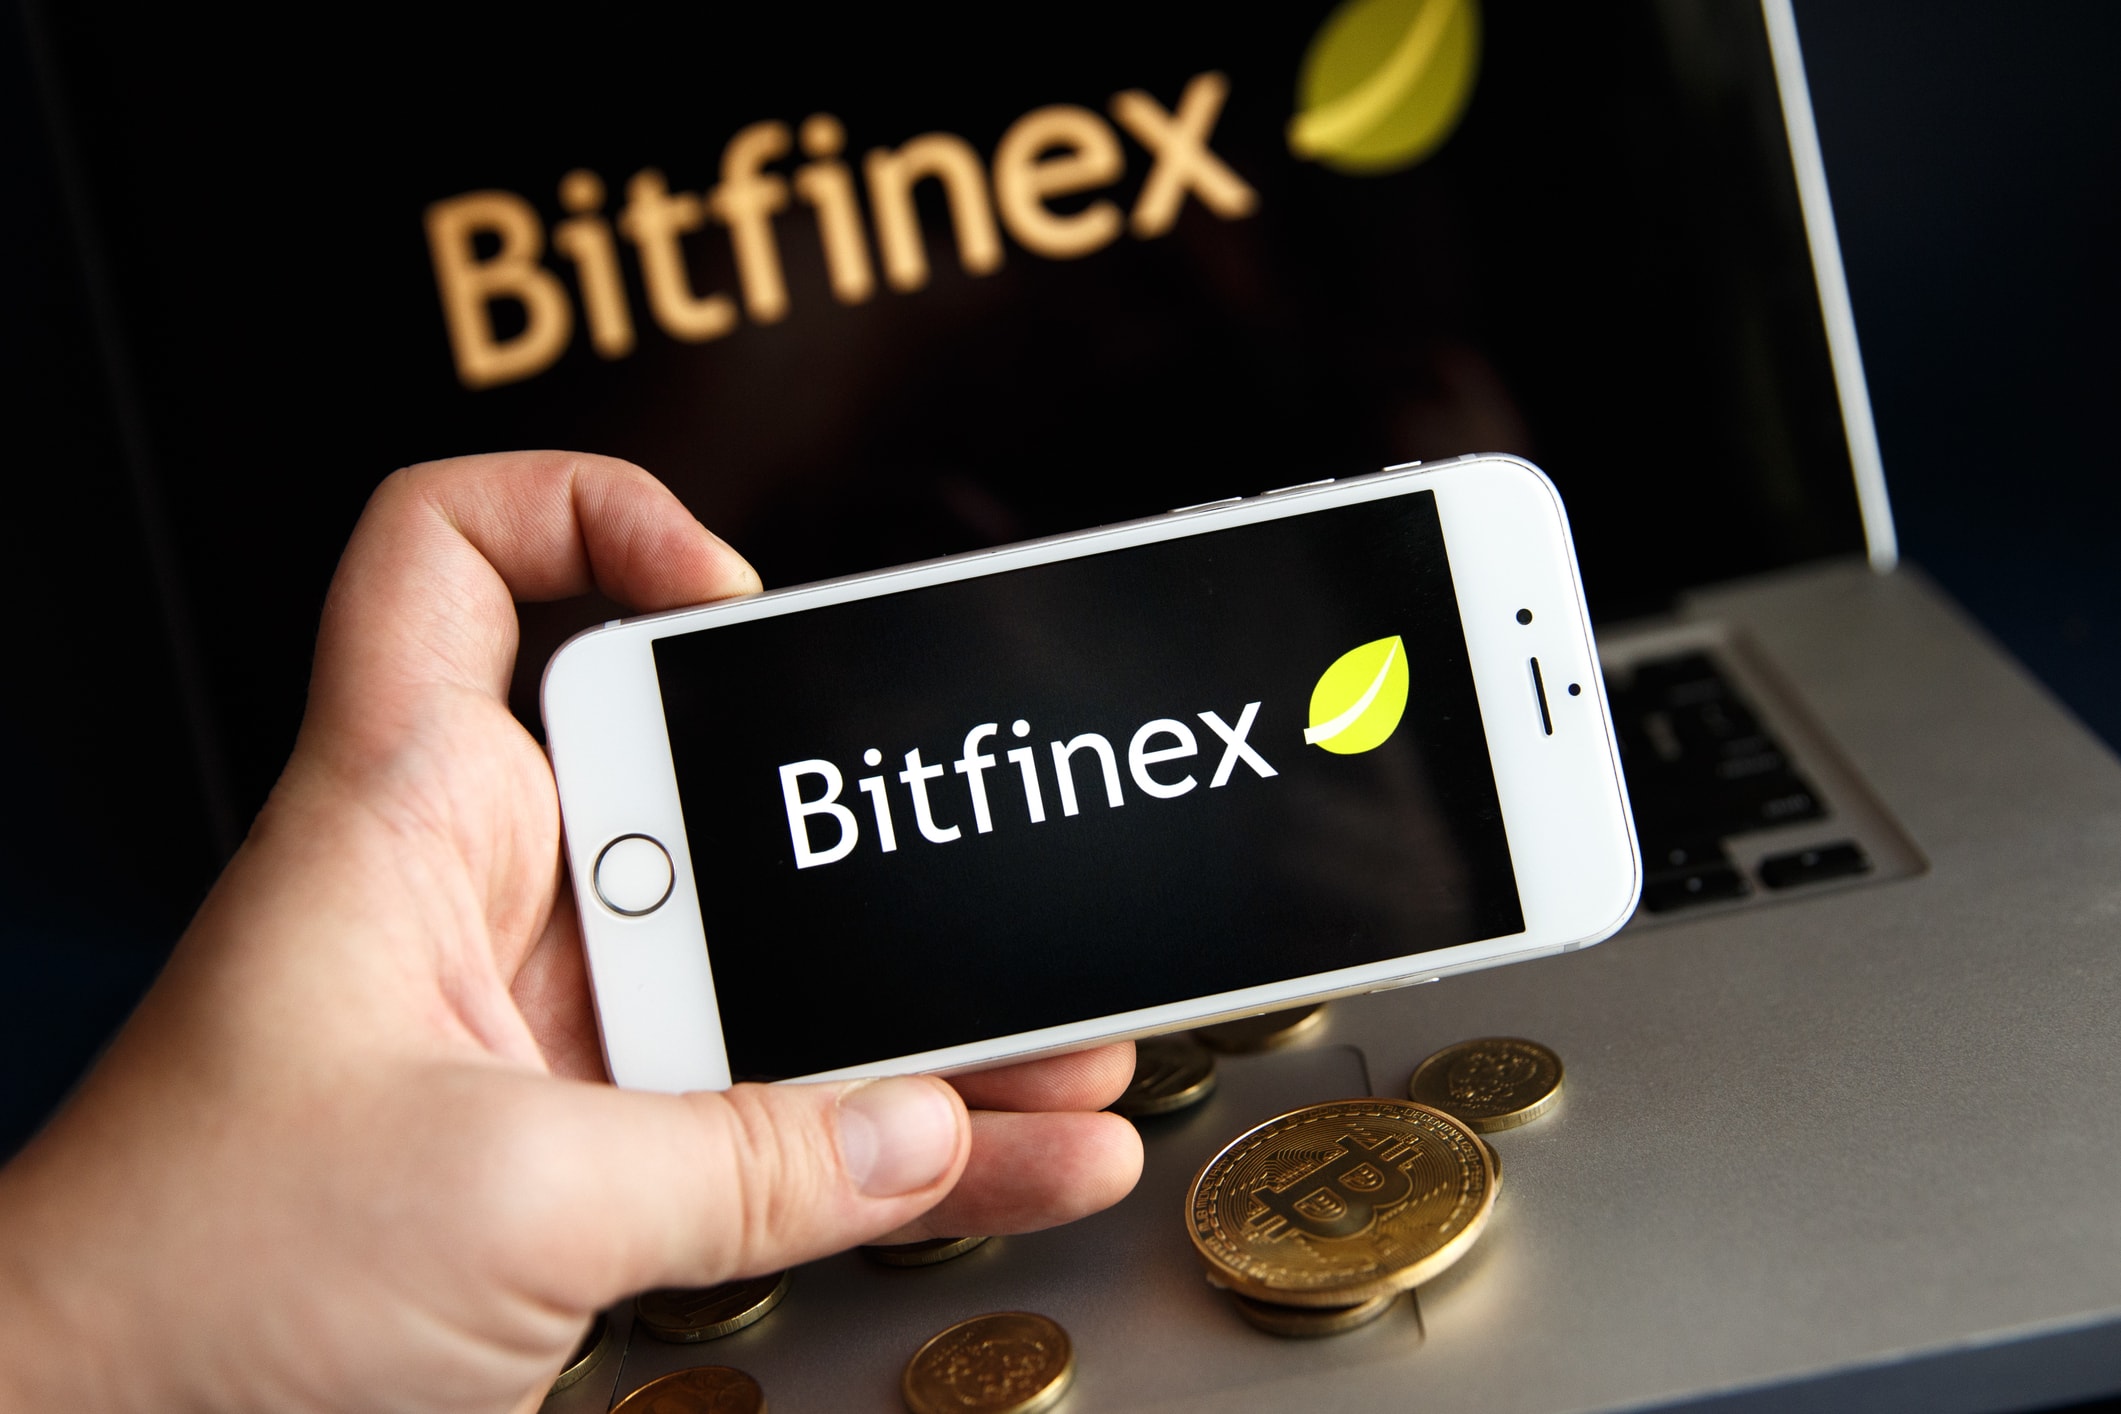 The Bitfinex token will be called LEO